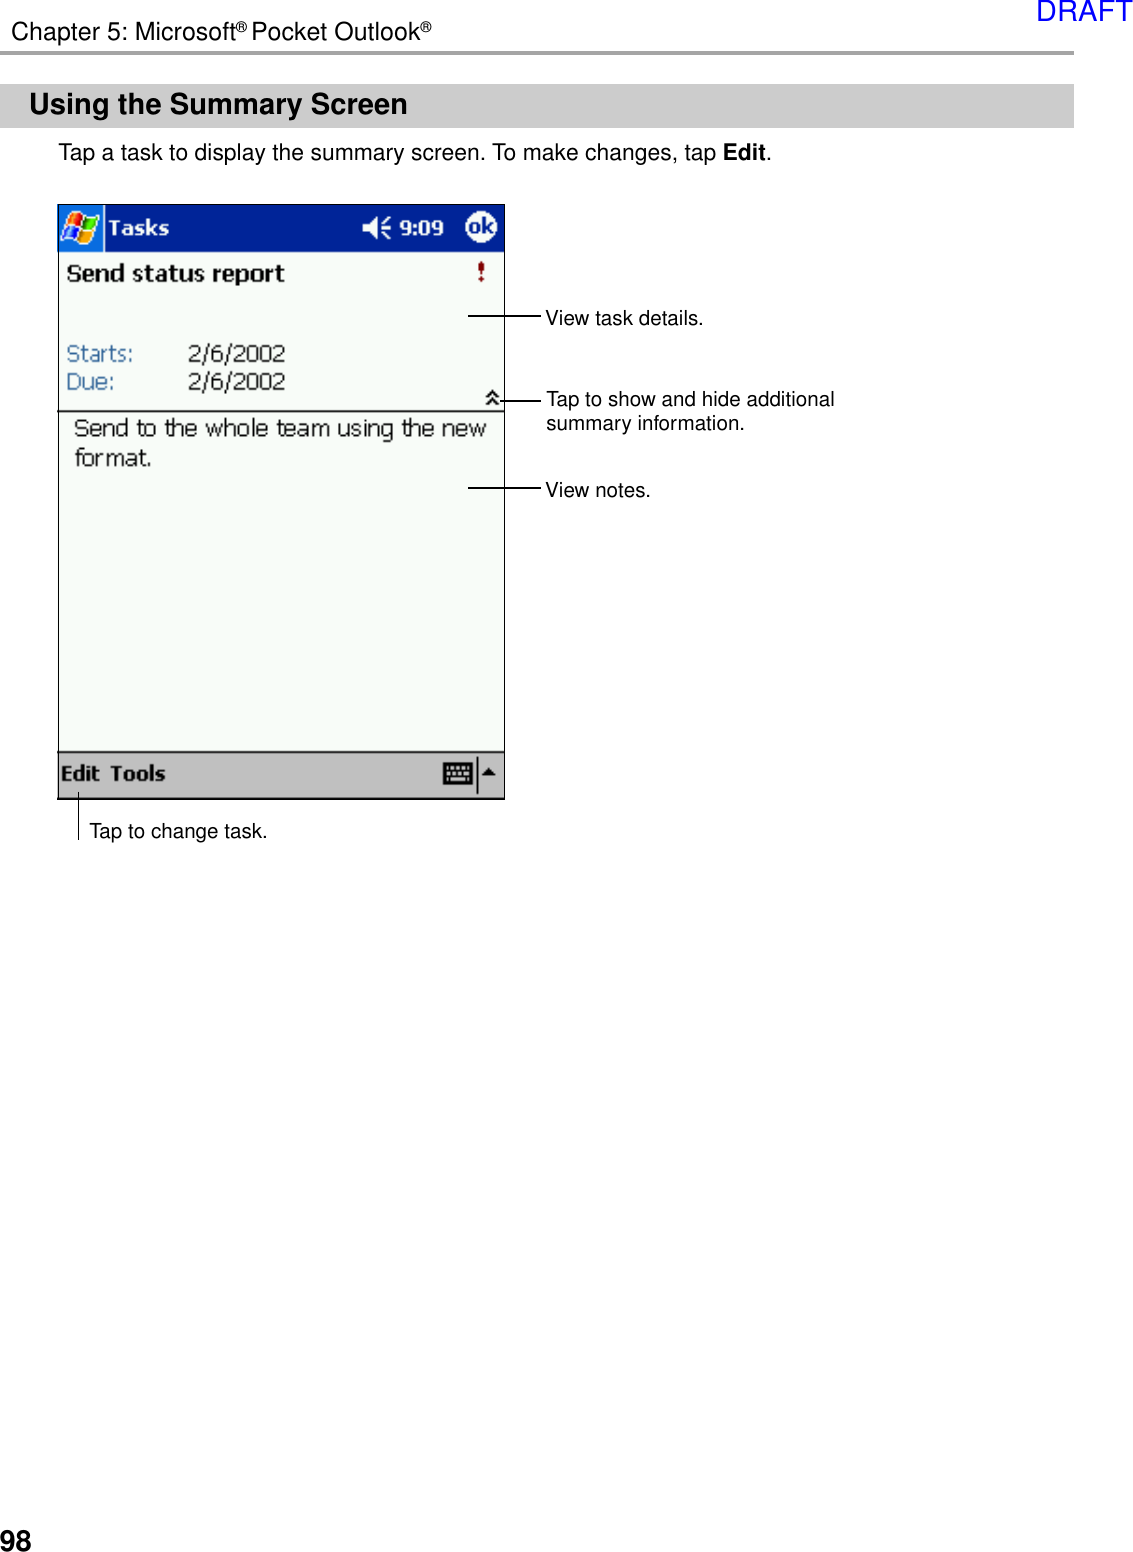 98Chapter 5: Microsoft® Pocket Outlook®Using the Summary ScreenTap a task to display the summary screen. To make changes, tap Edit.View task details.View notes.Tap to show and hide additionalsummary information.Tap to change task.DRAFT